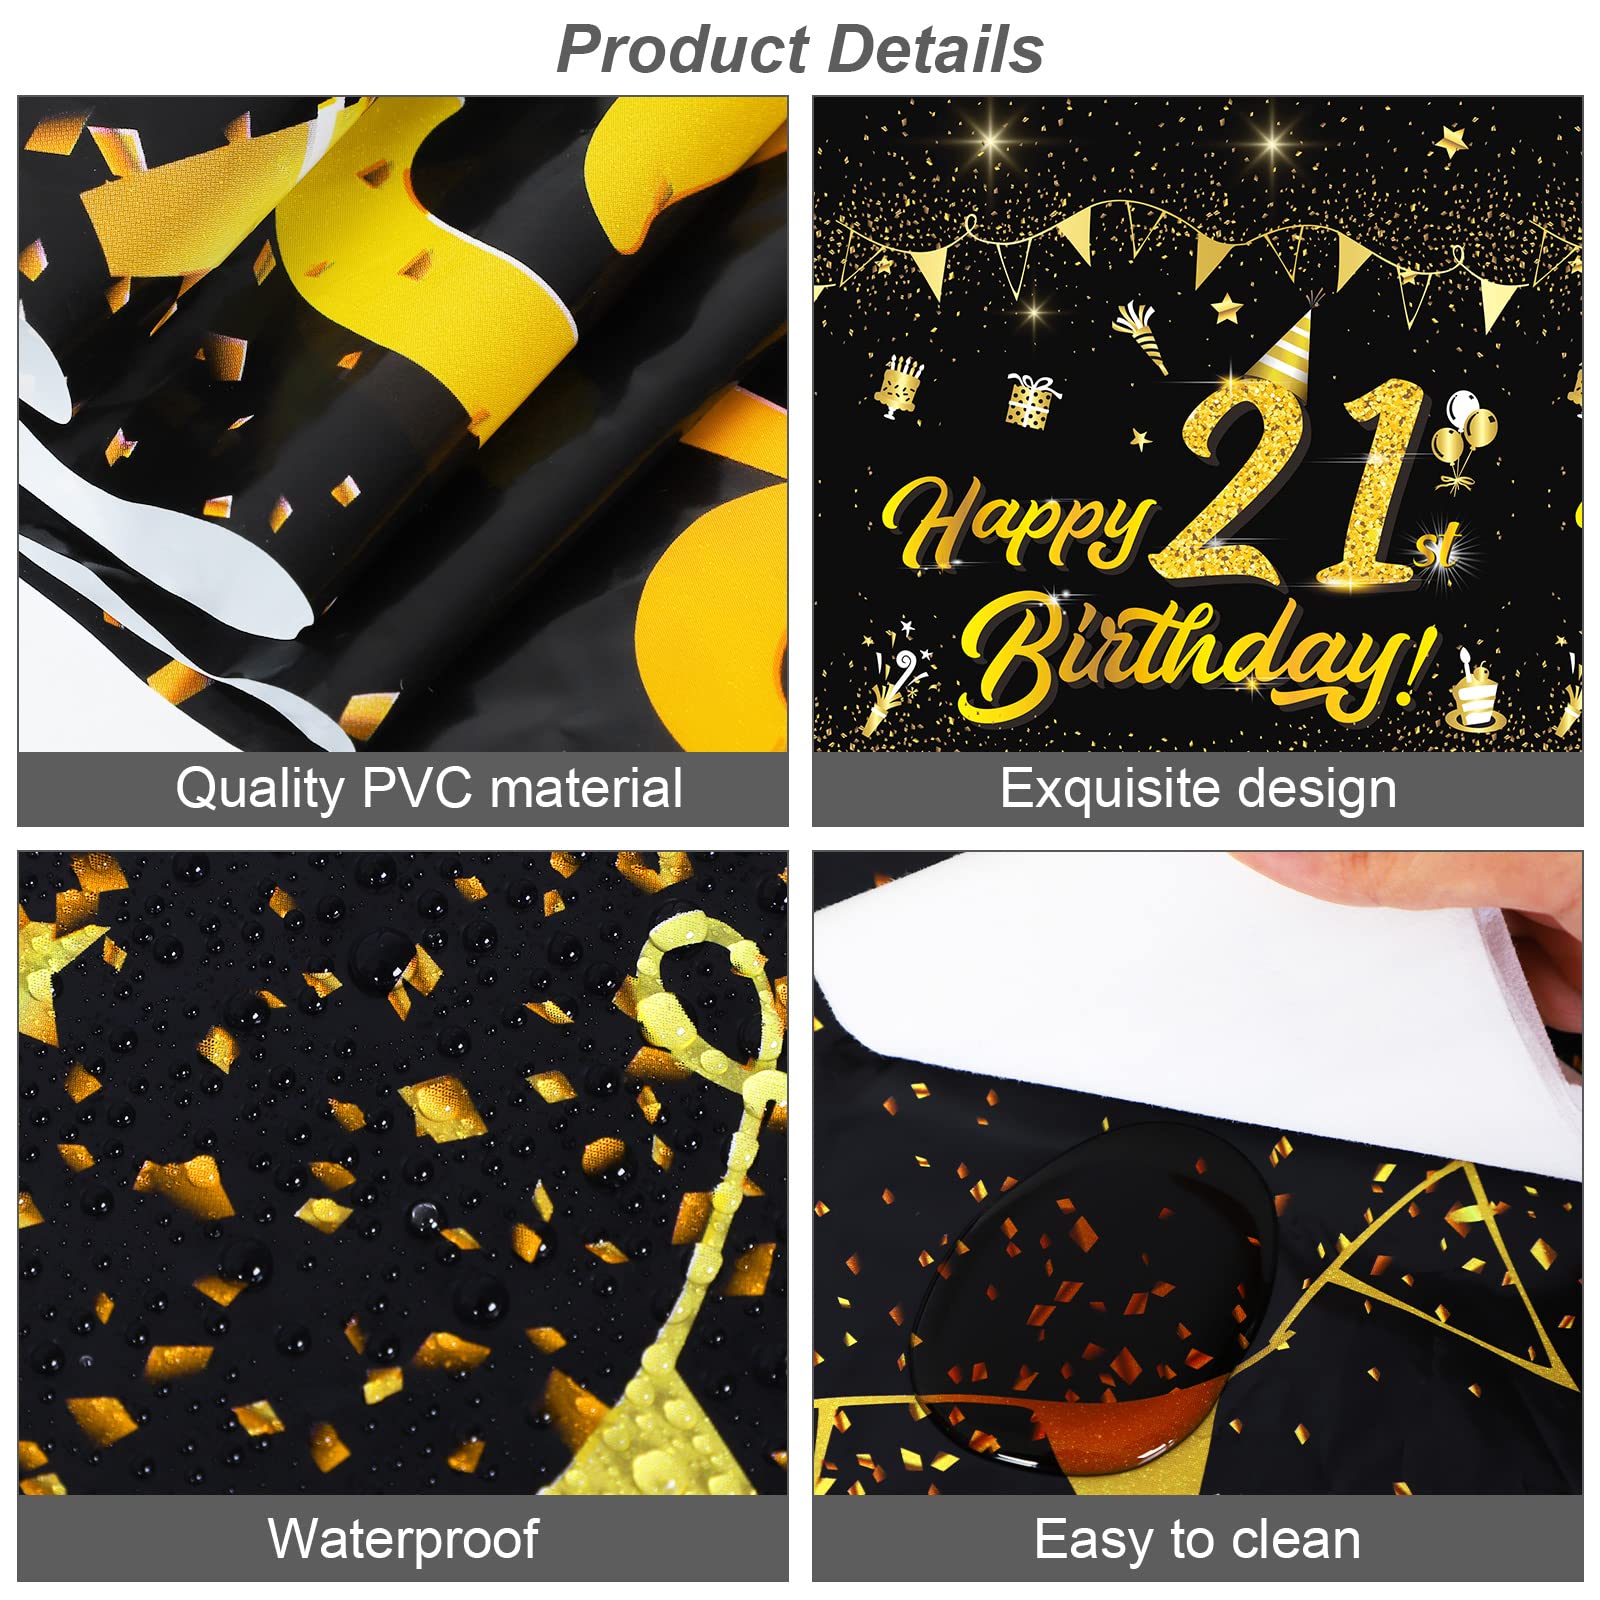 durony 2 Pack 21st Birthday Tablecloth Table Cover Plastic Black Gold Happy Tablecloth Waterproof Rectangular Table Cloth Cover for Indoor or Outdoor Parties Birthday